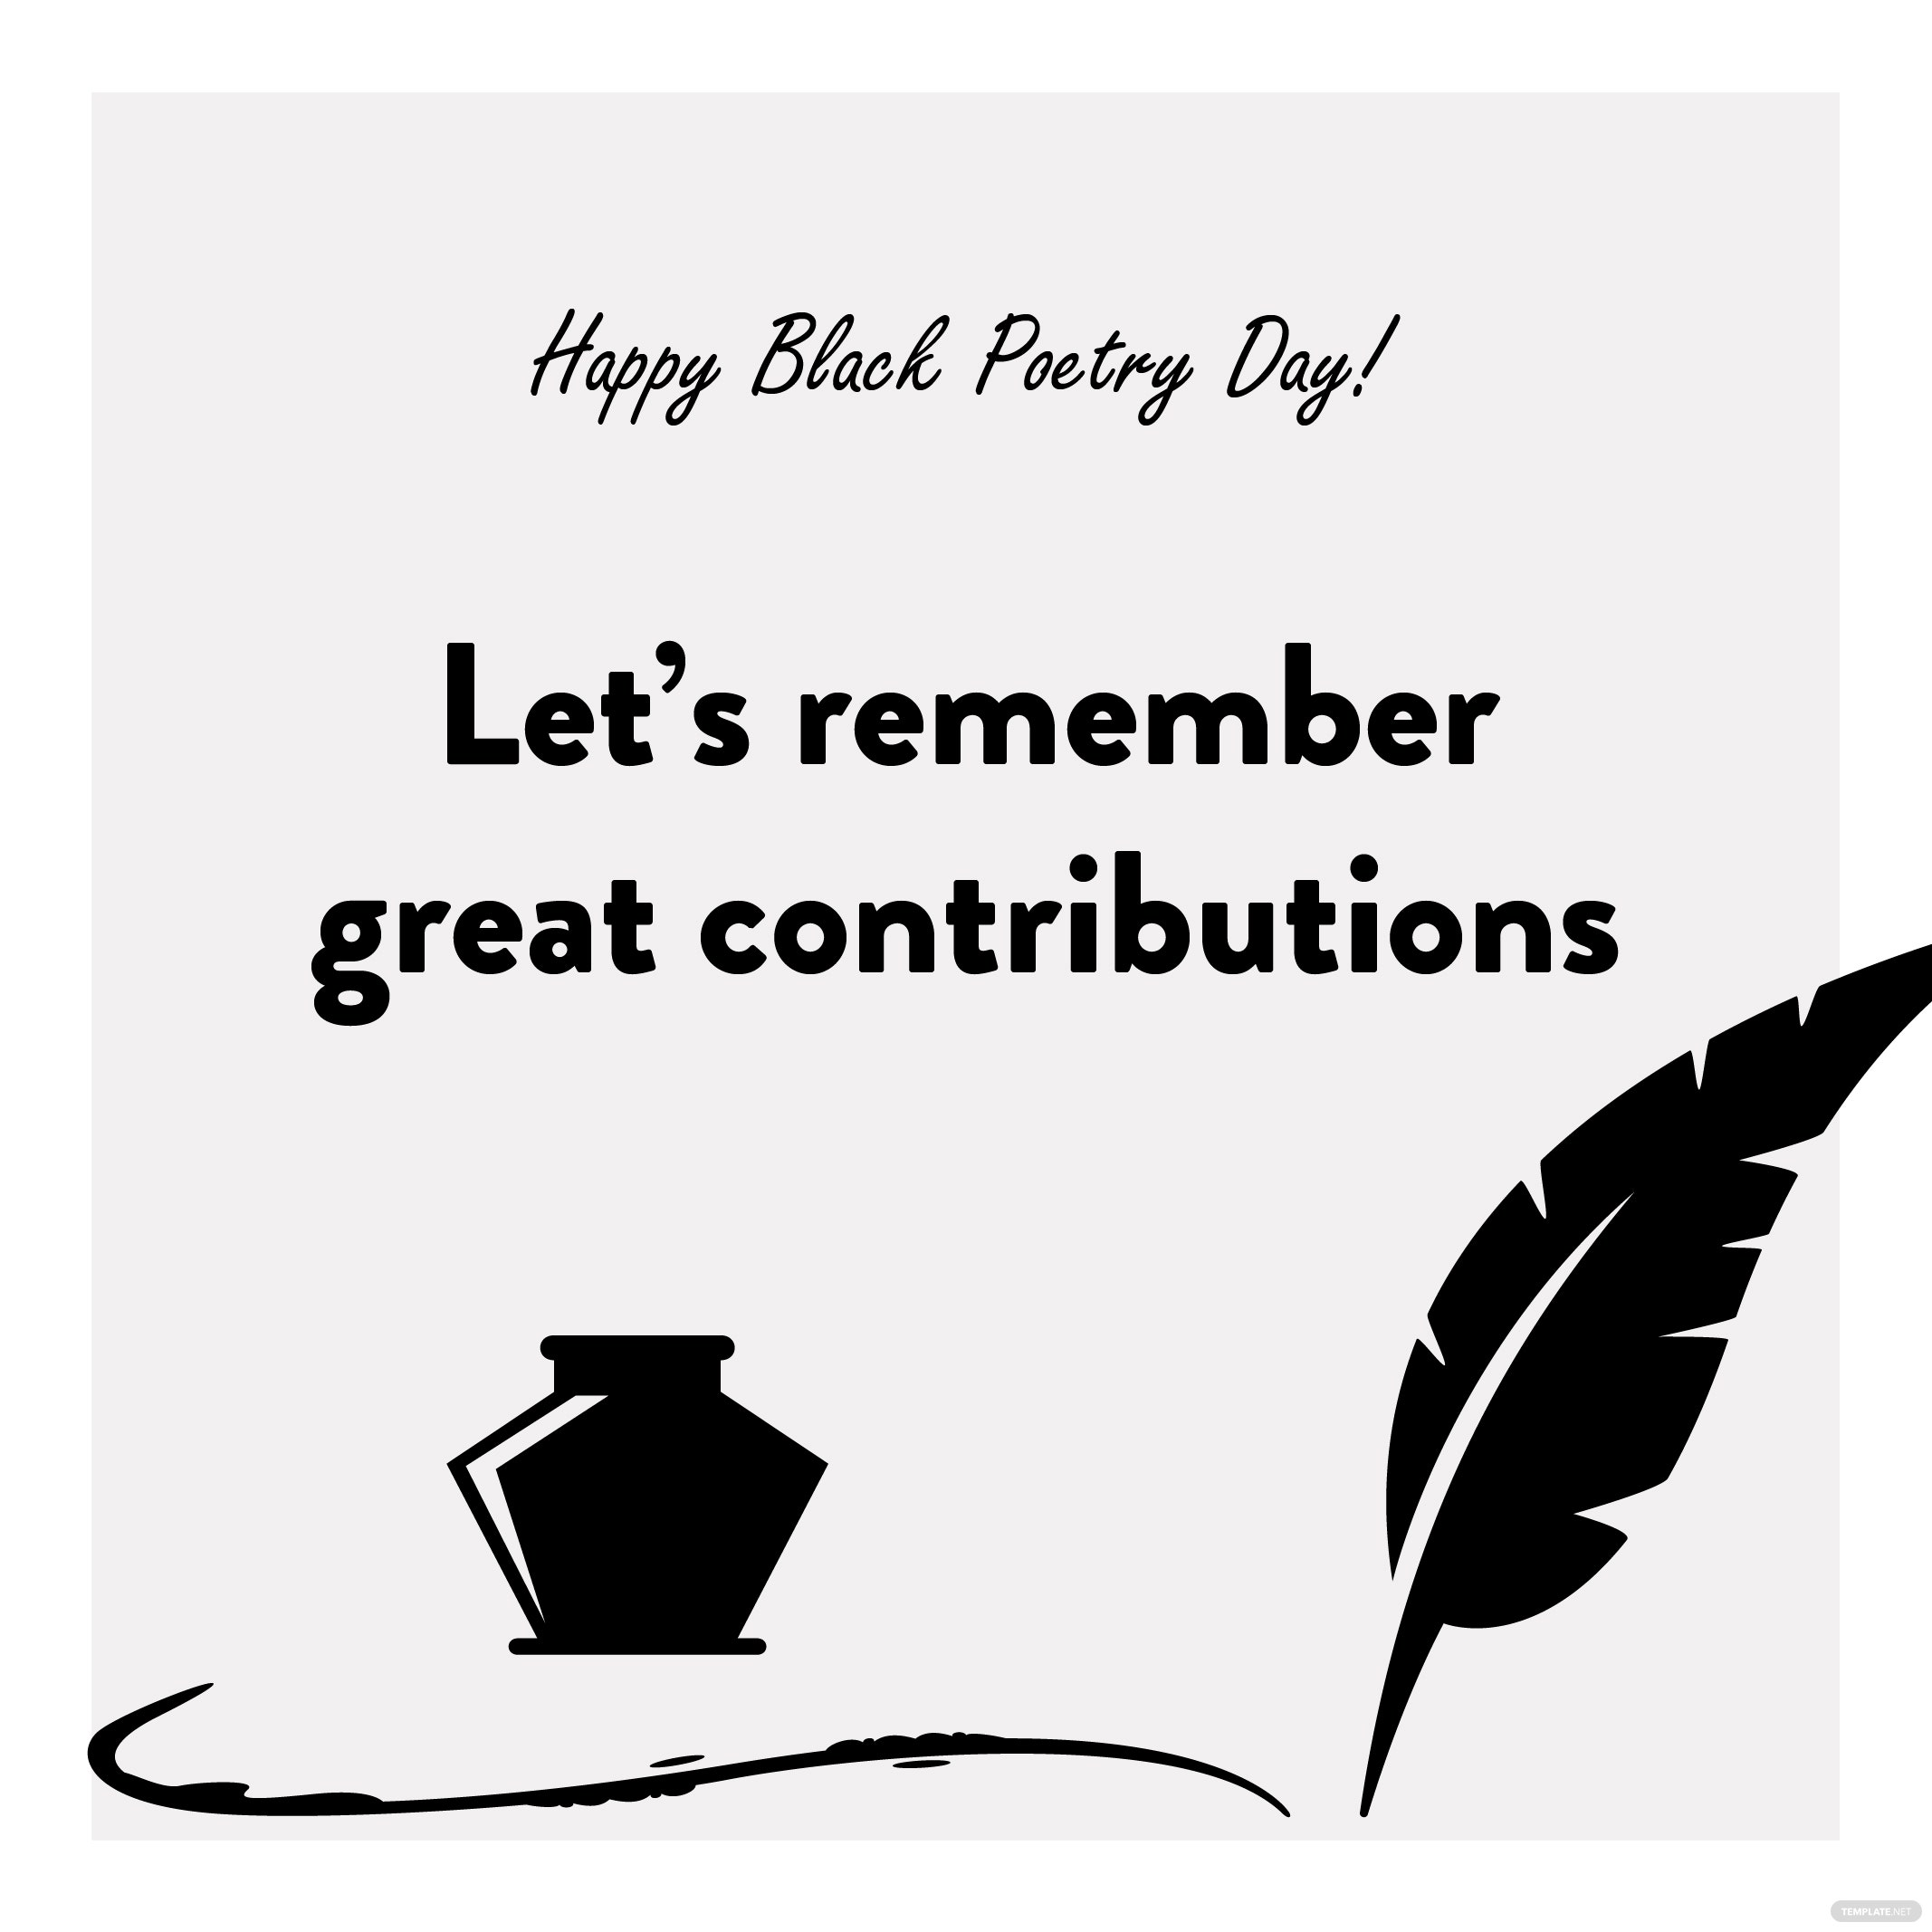 black poetry day greeting card vector ideas and examples